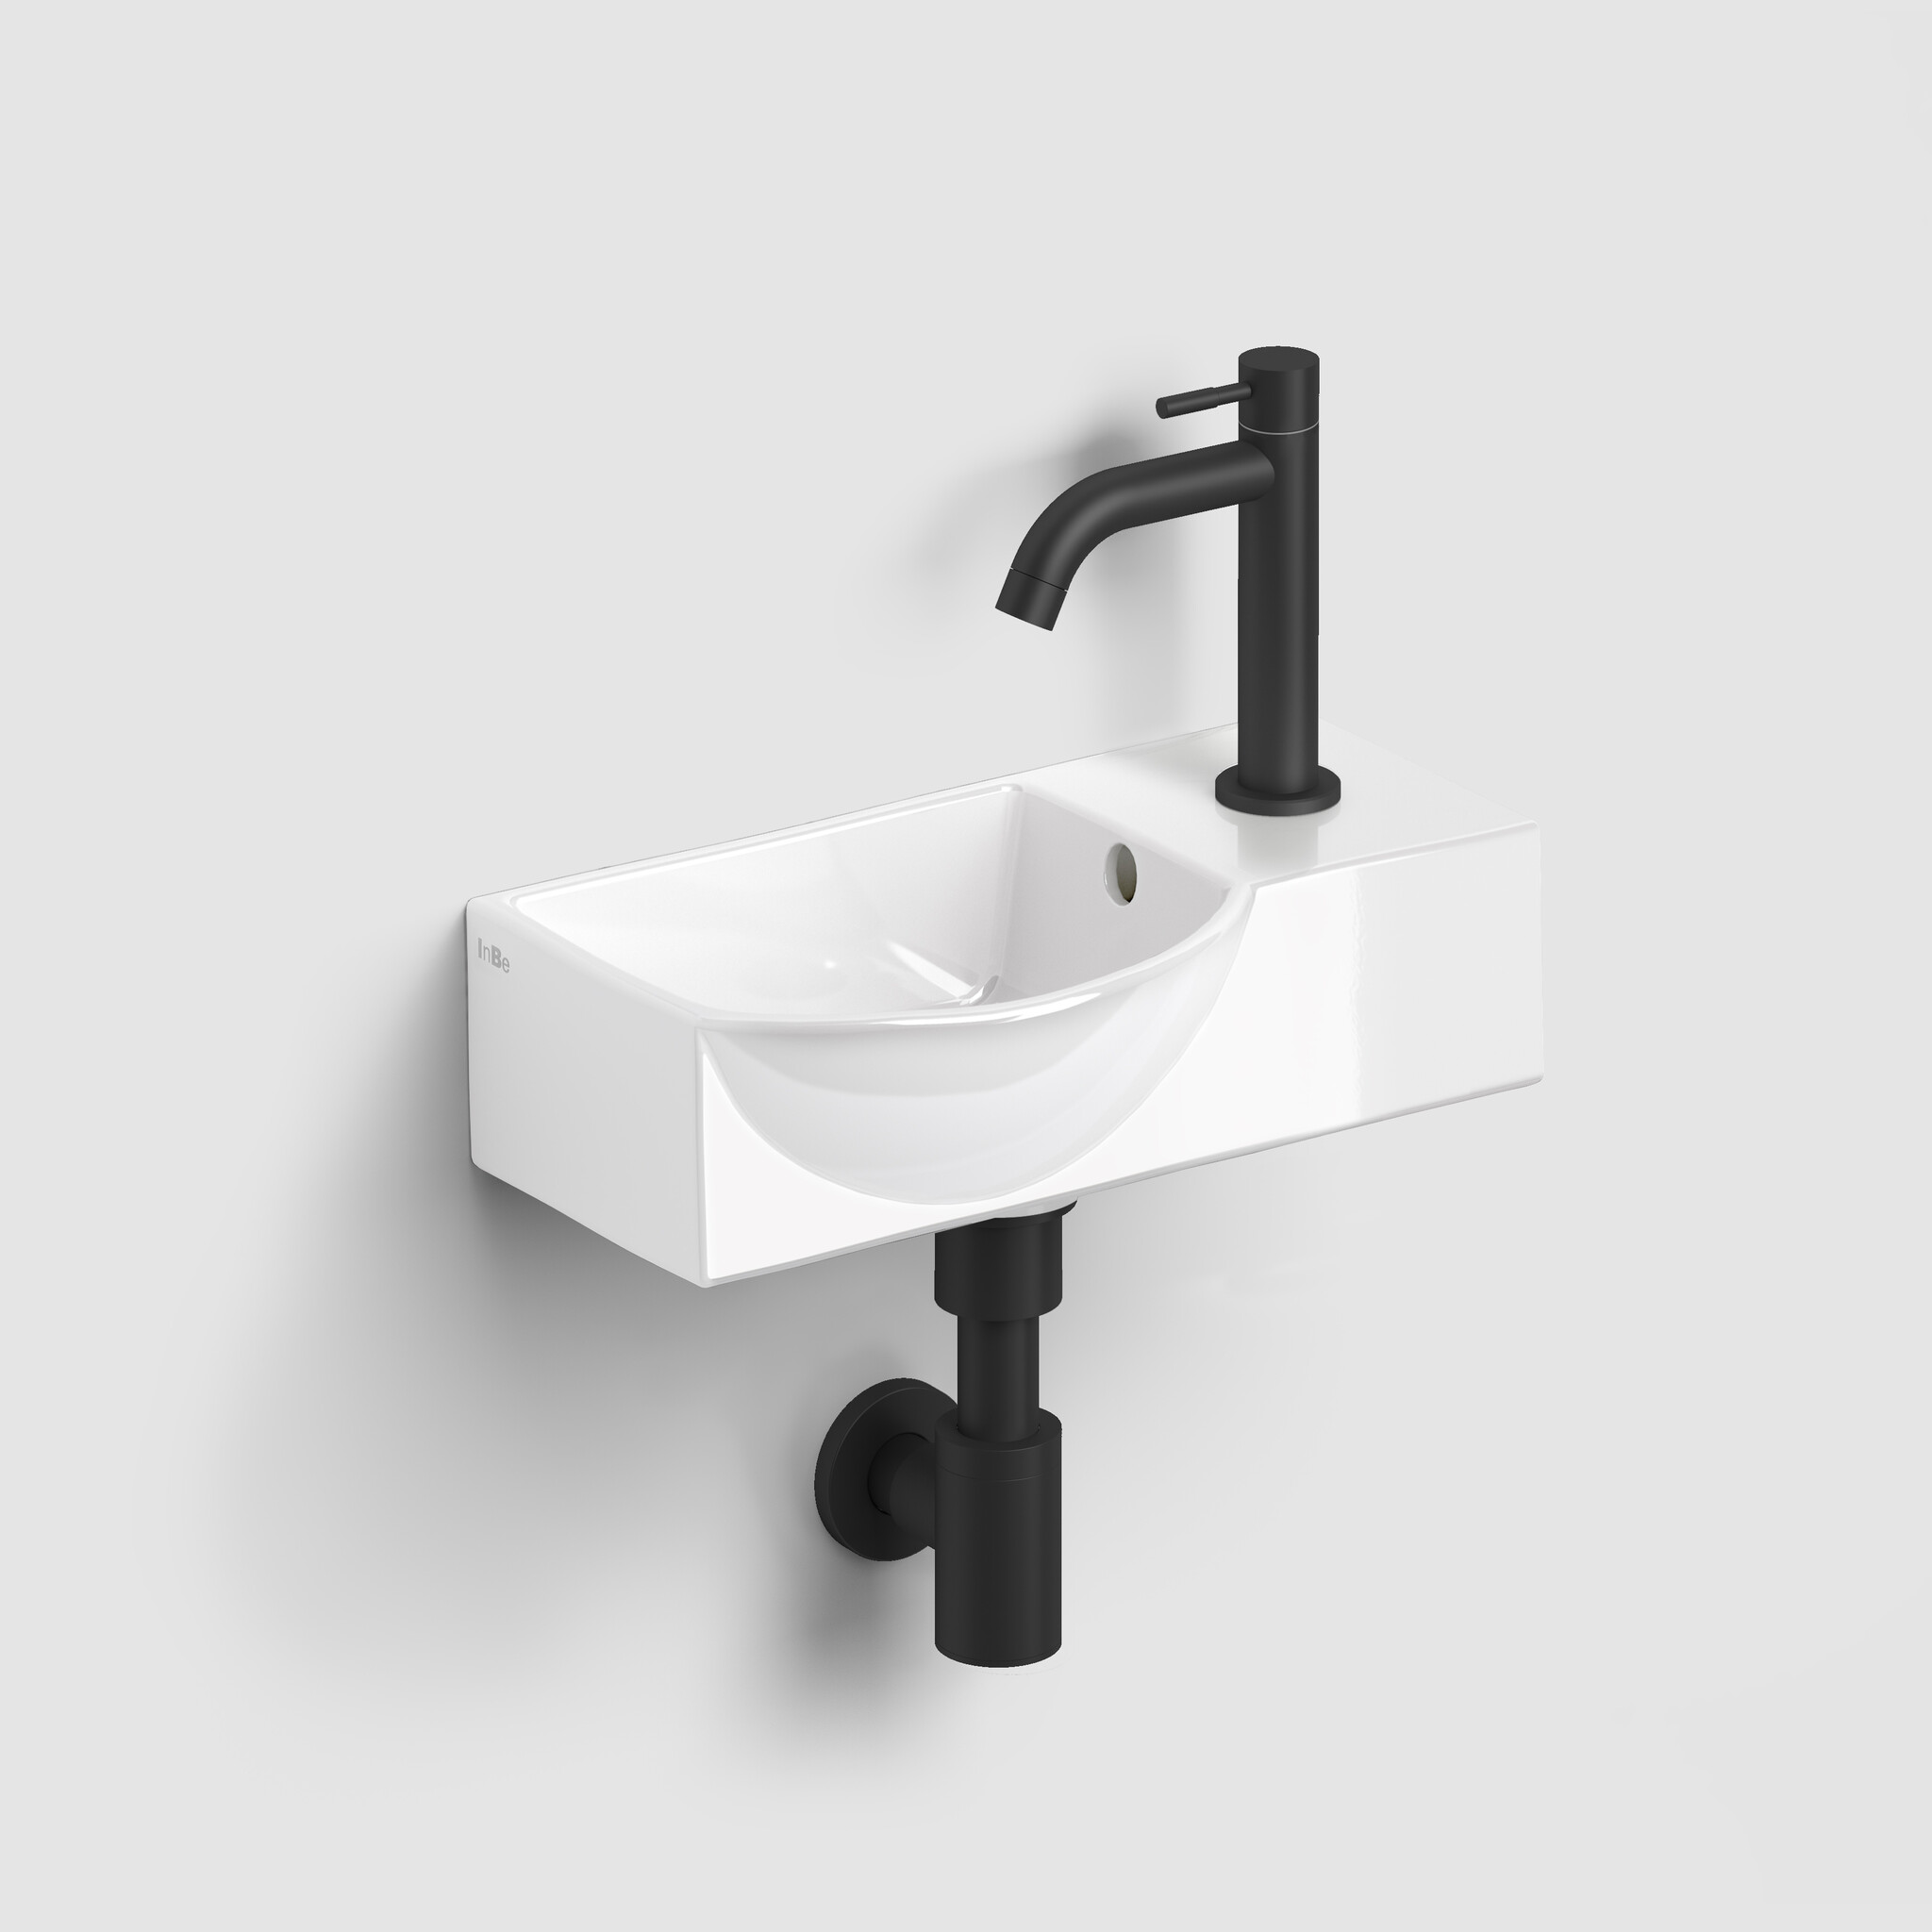 InBe InBe hand basin set 8, with hand basin, tap, drain and trap, white ceramics and matt black